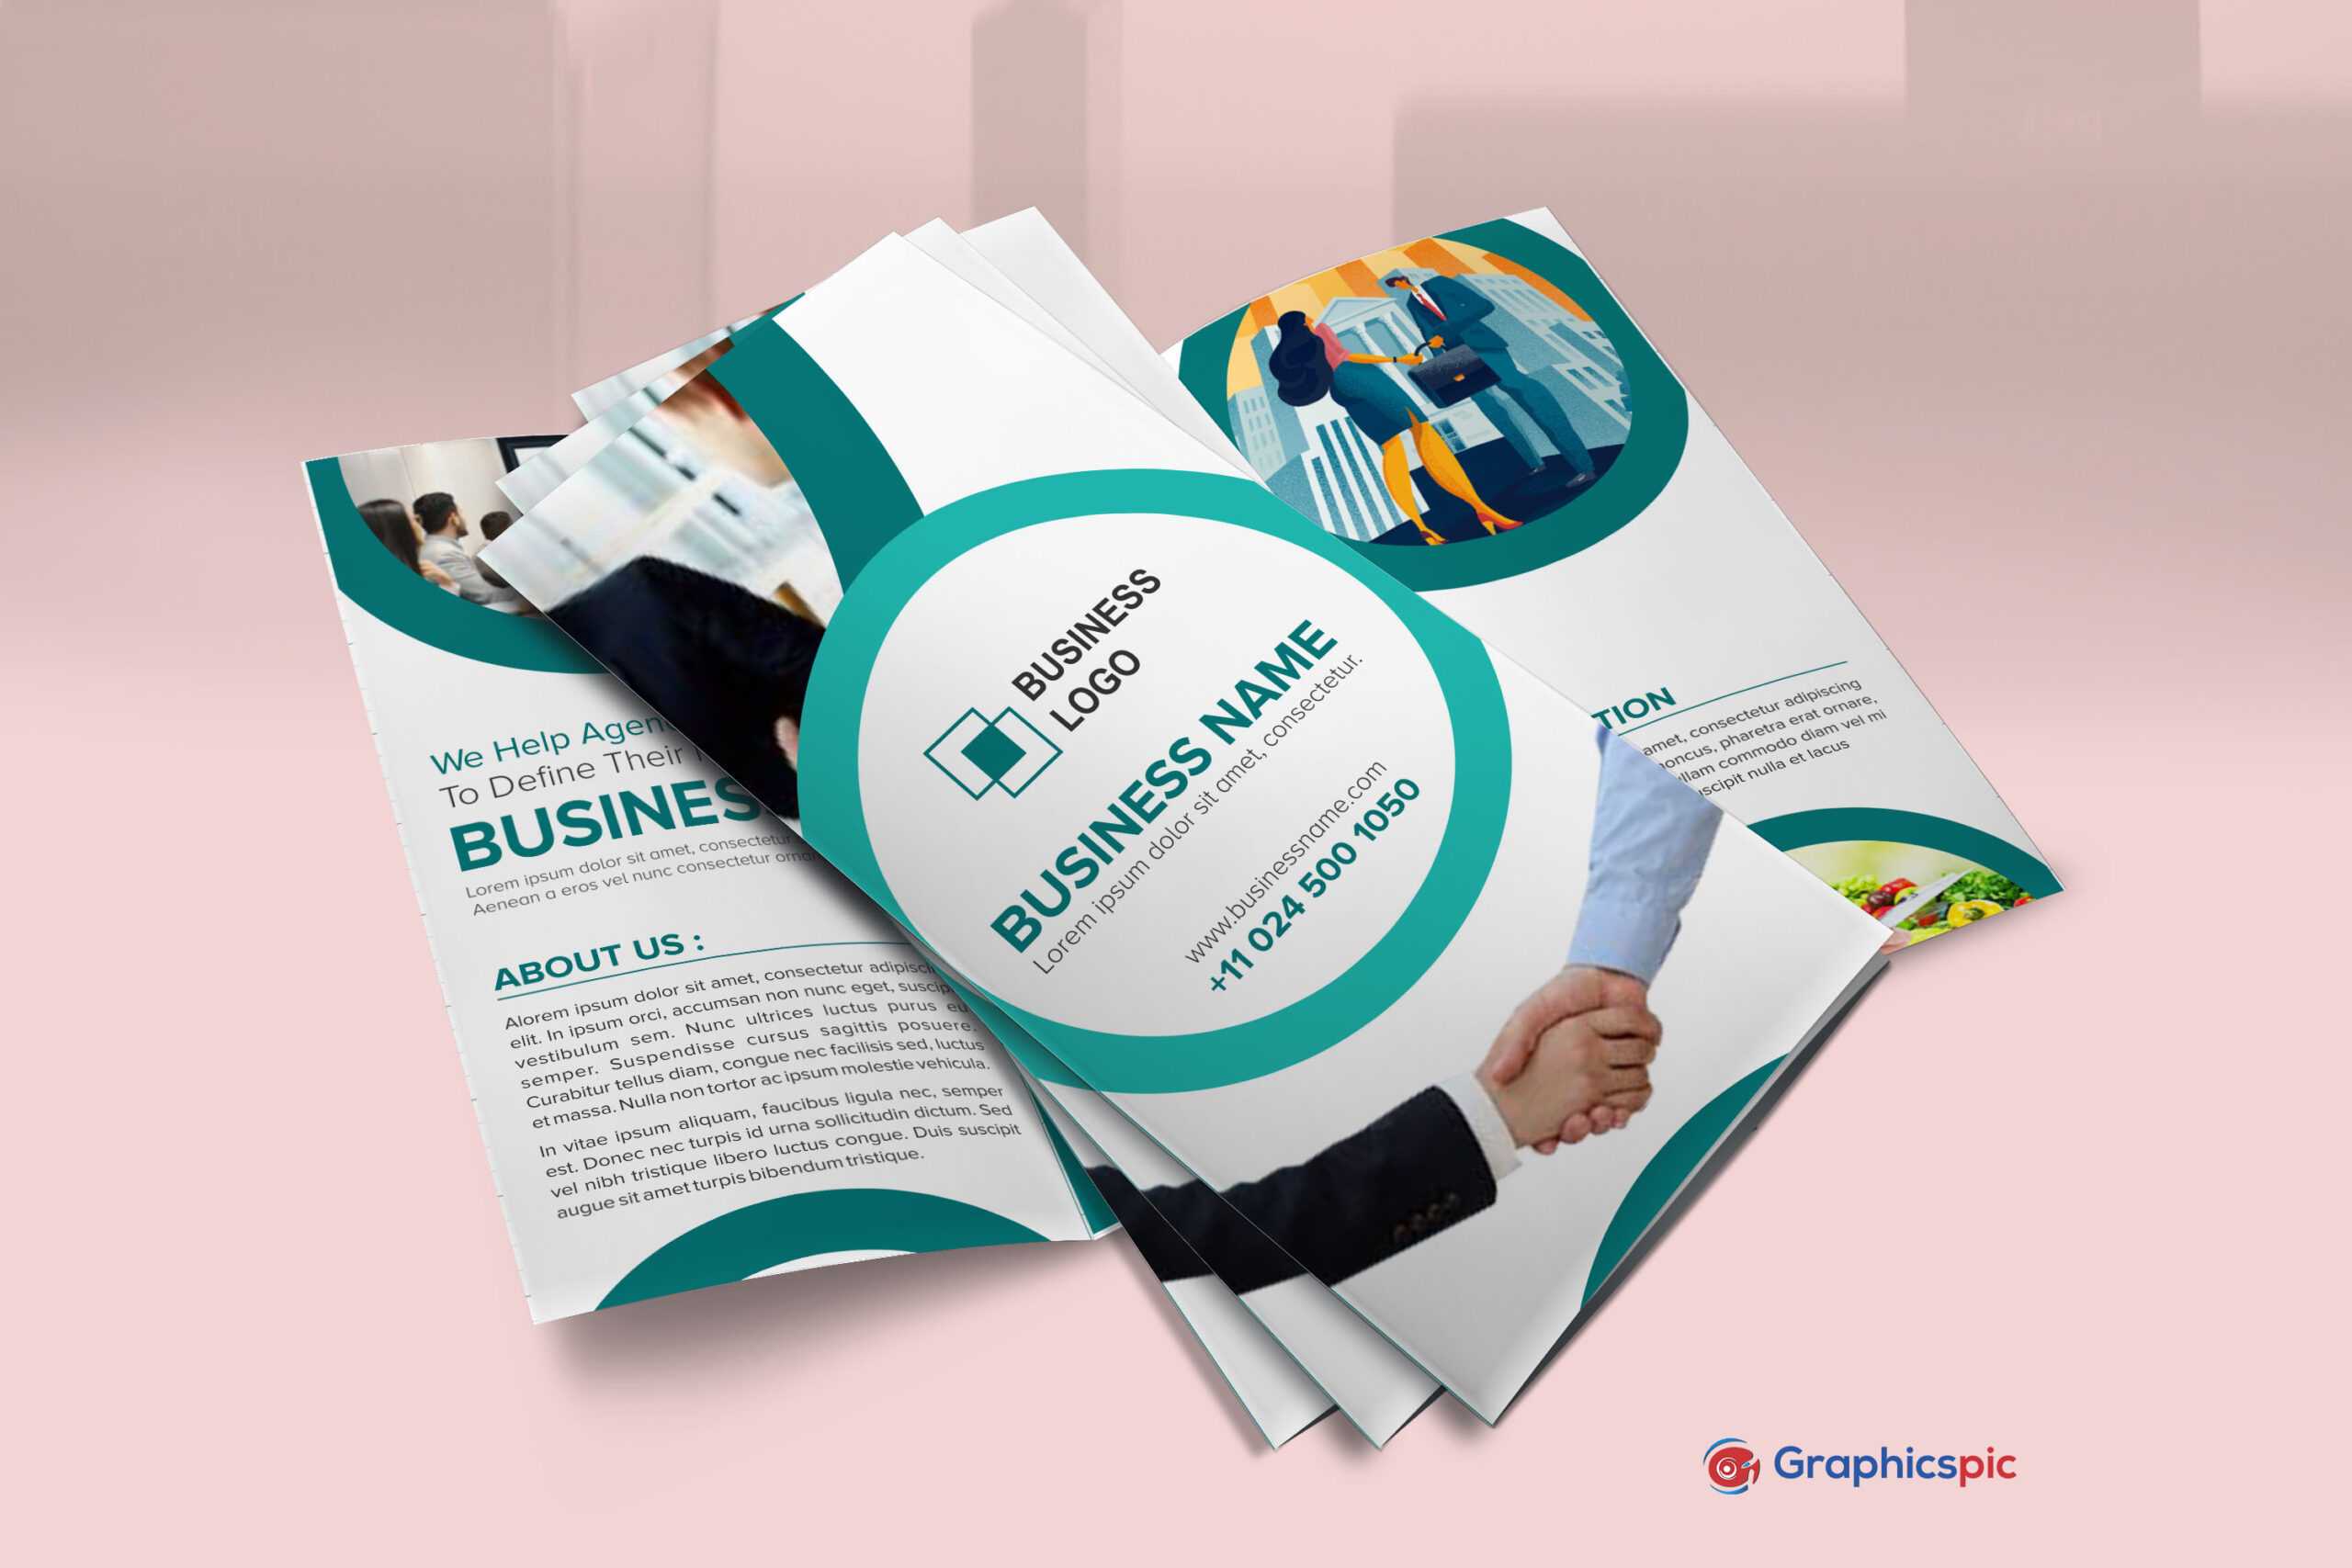 Free Download Brochure Templates Design For Events, Products Inside Free Brochure Template Downloads